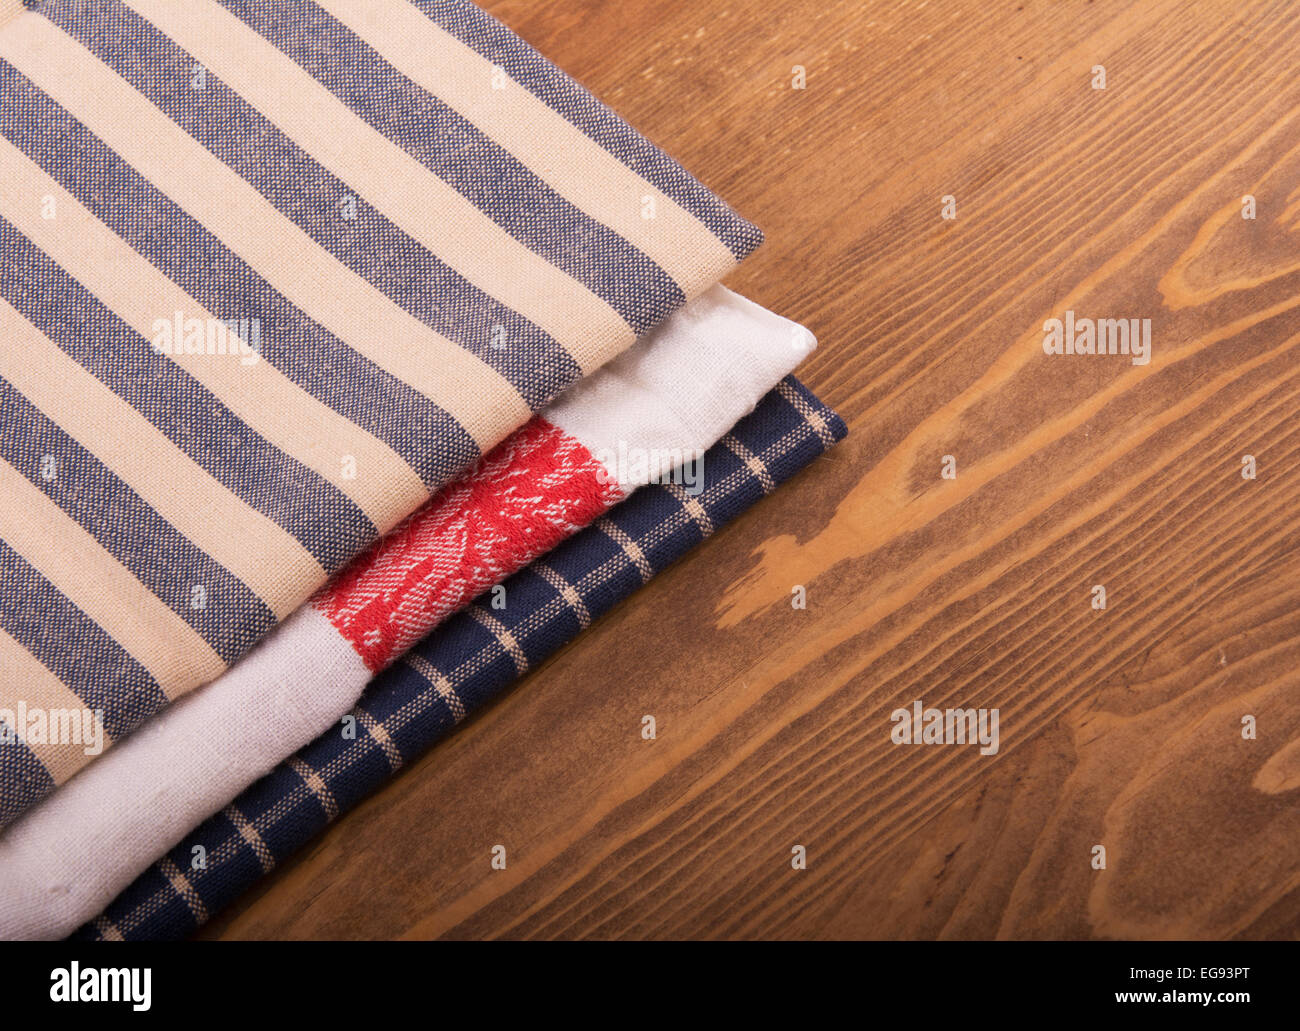 Old linen kitchen towels folded on dark wooden table Stock Photo